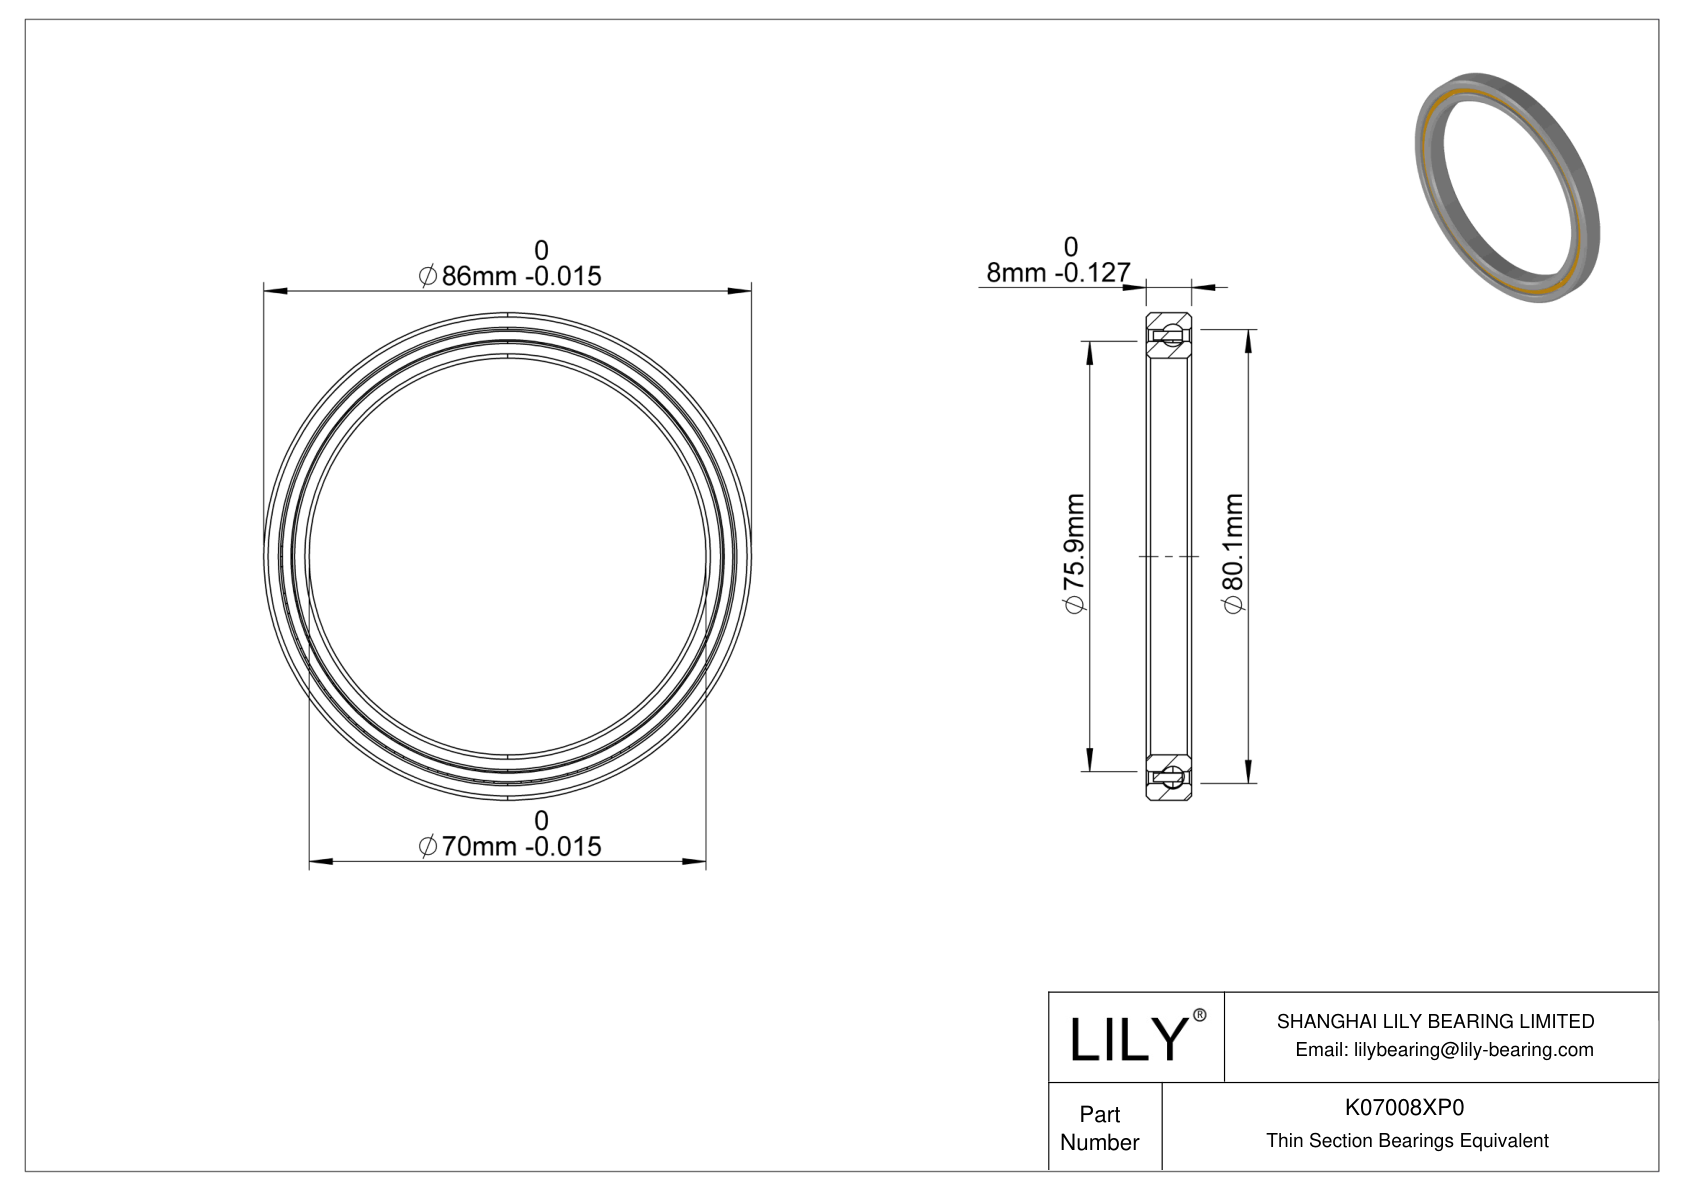 K07008XP0 Constant Section (CS) Bearings cad drawing